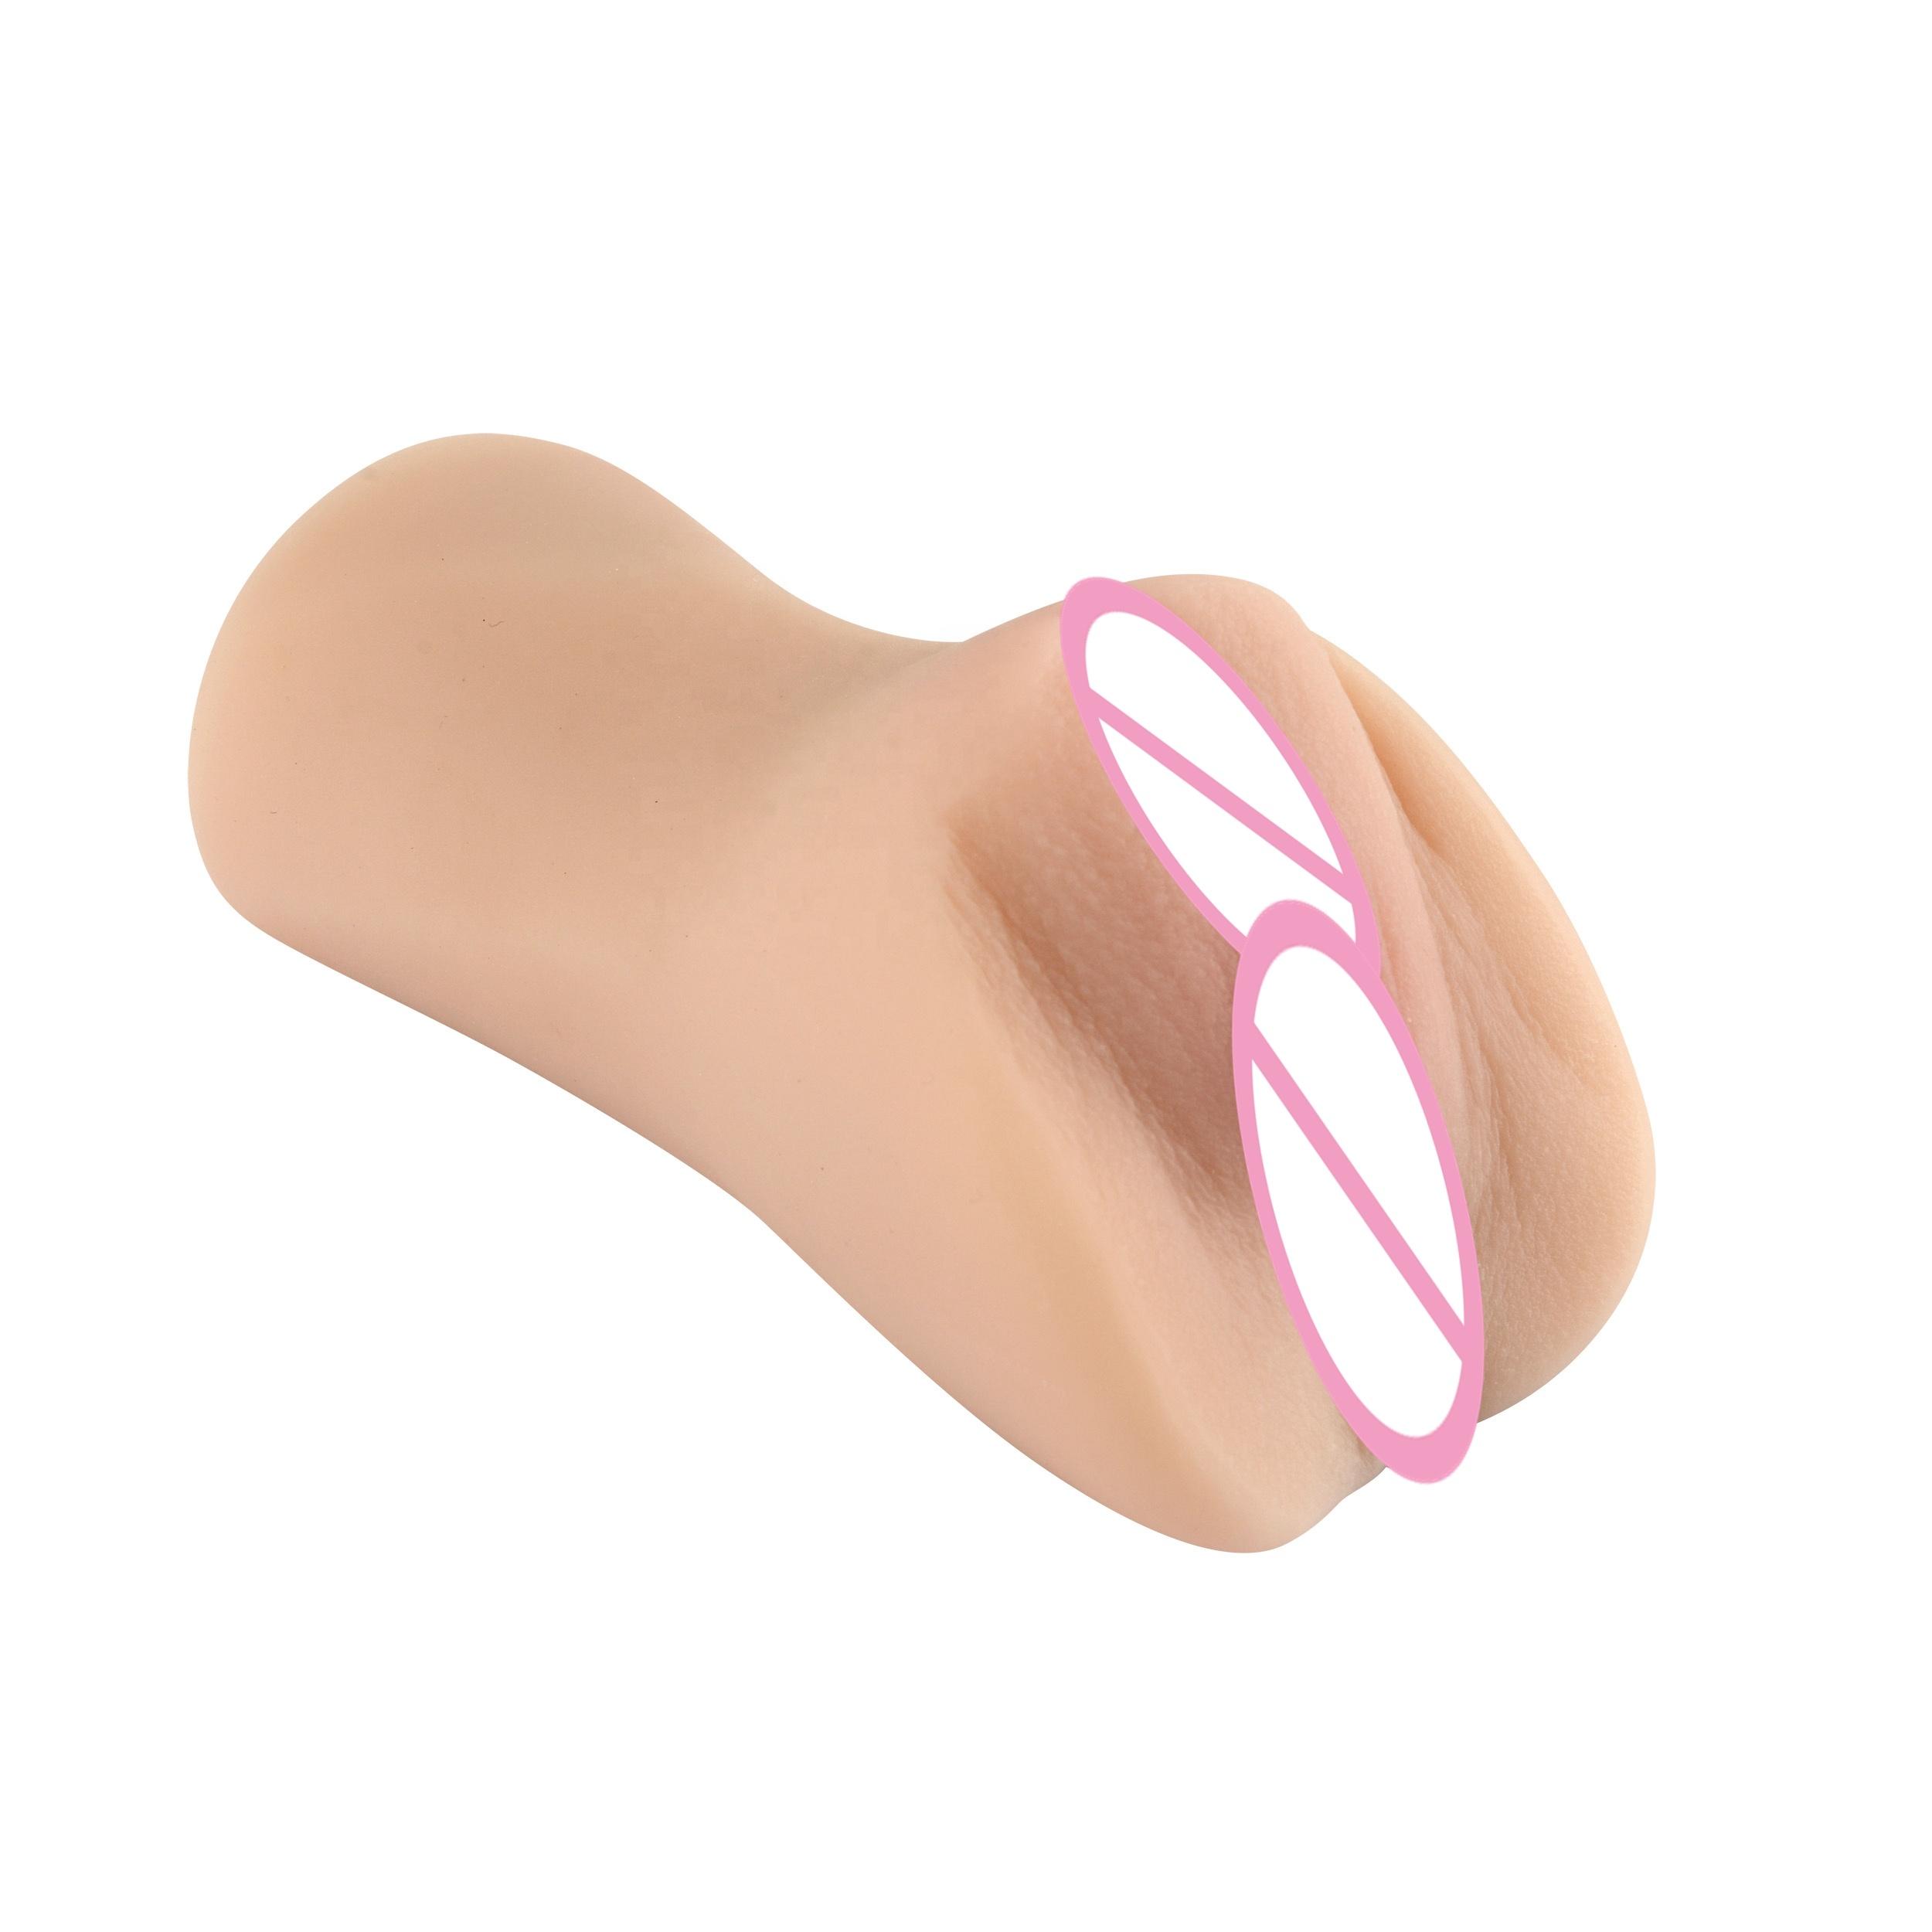  Artificial But Hot Attractive Female Private Part Compact Hole Sex Toy For Men Masturbation Cup